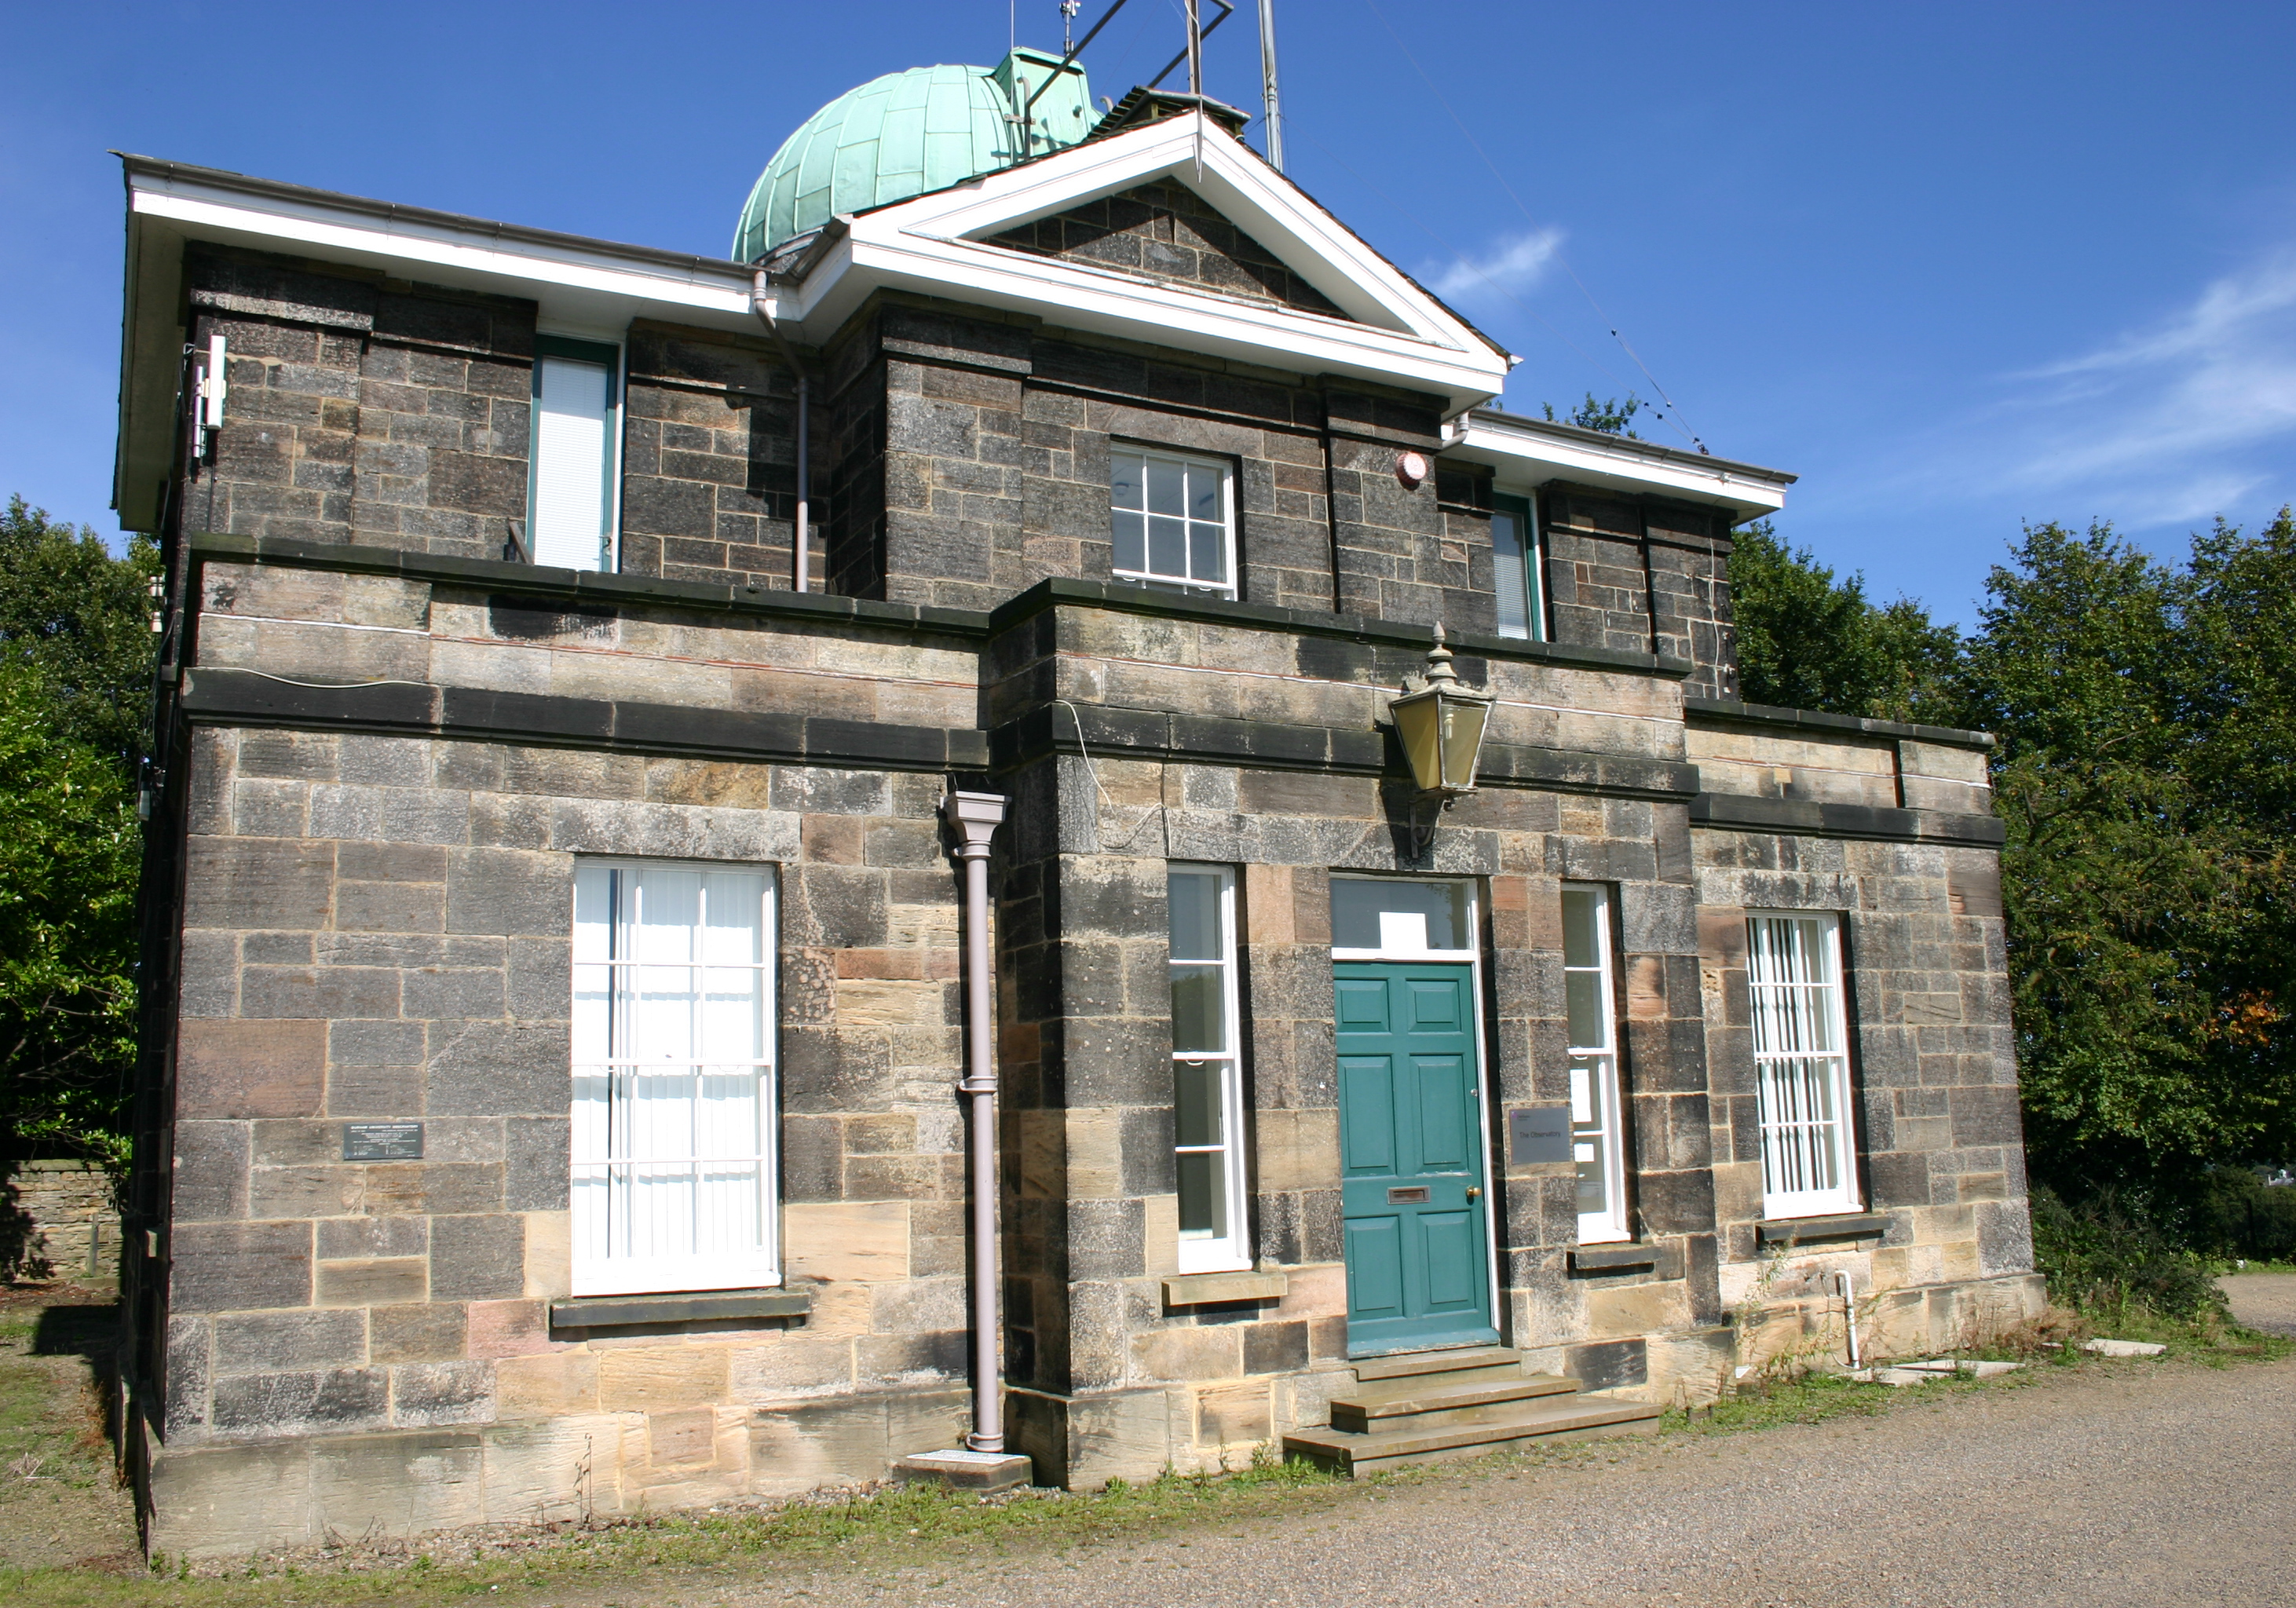 The Durham University Observatory is a weather observatory owned and operated by the University of Durham. It is a Grade II listed building located at Potters Bank and was founded in 1839.